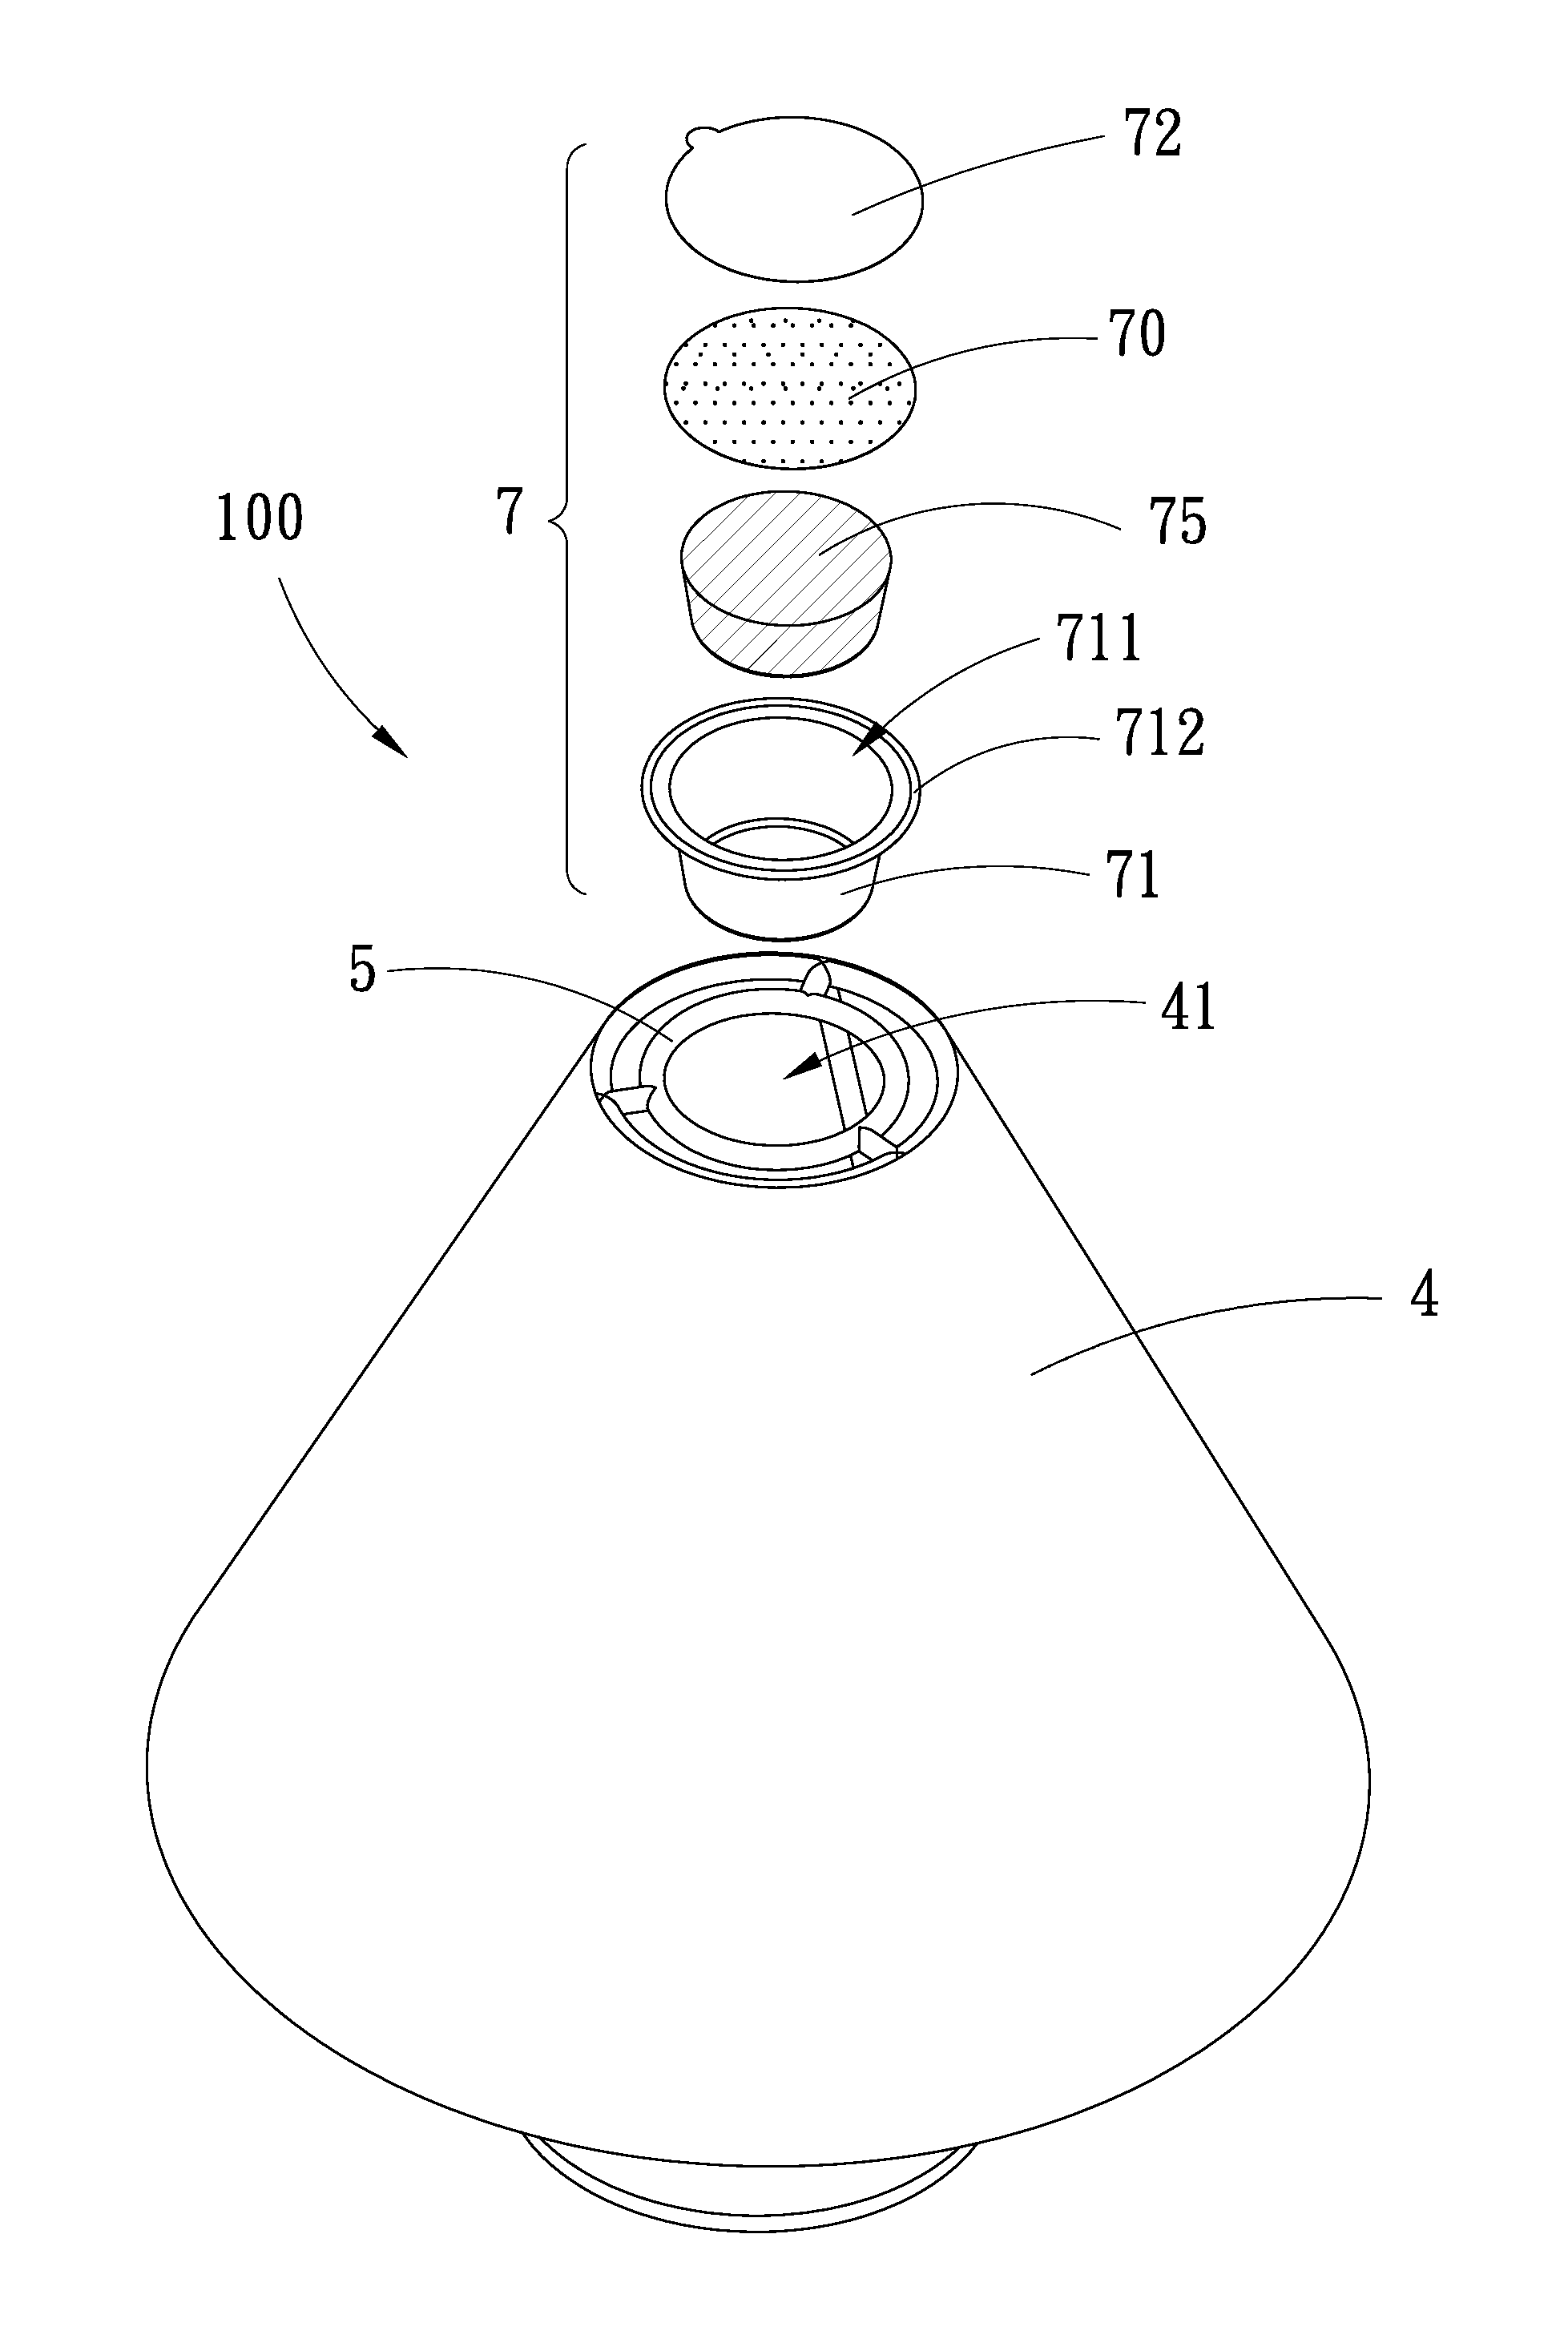 System having a lamp assembled with an aroma capsule that disperses scent